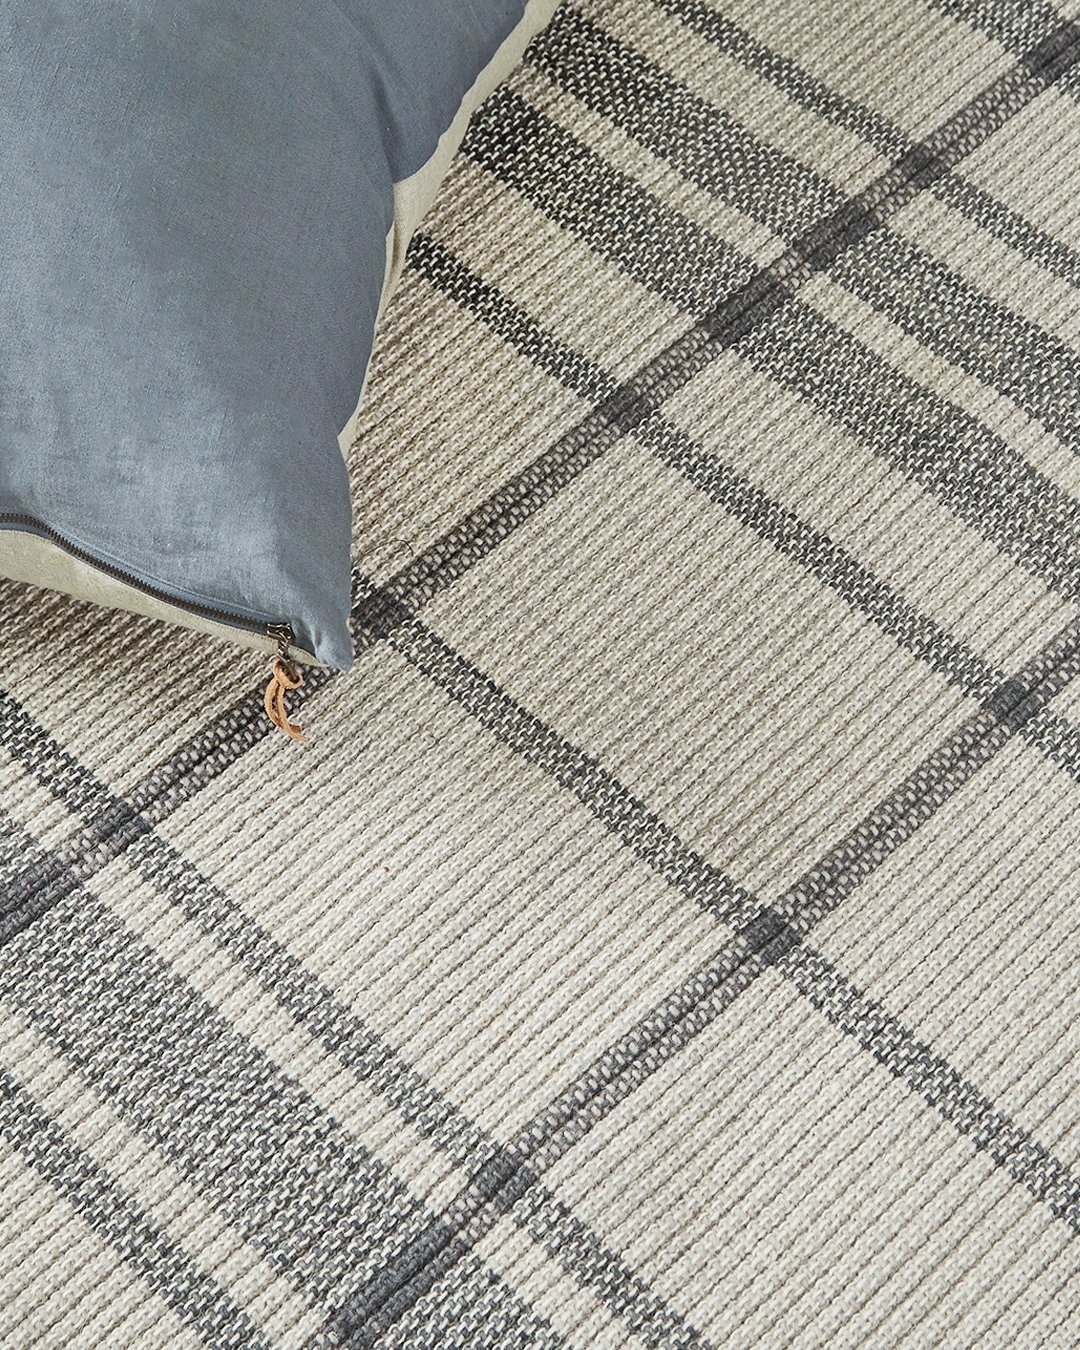 ☆ Adorn Your Floor ☆​​​​​​​​
​​​​​​​​
Have you explored our selection of generously sized and beautifully made jute and cotton rugs?

Featured &ndash; the oversized Bixby Rug boasts a plaid pattern in denim blue and natural on an intricate weave.
​​​